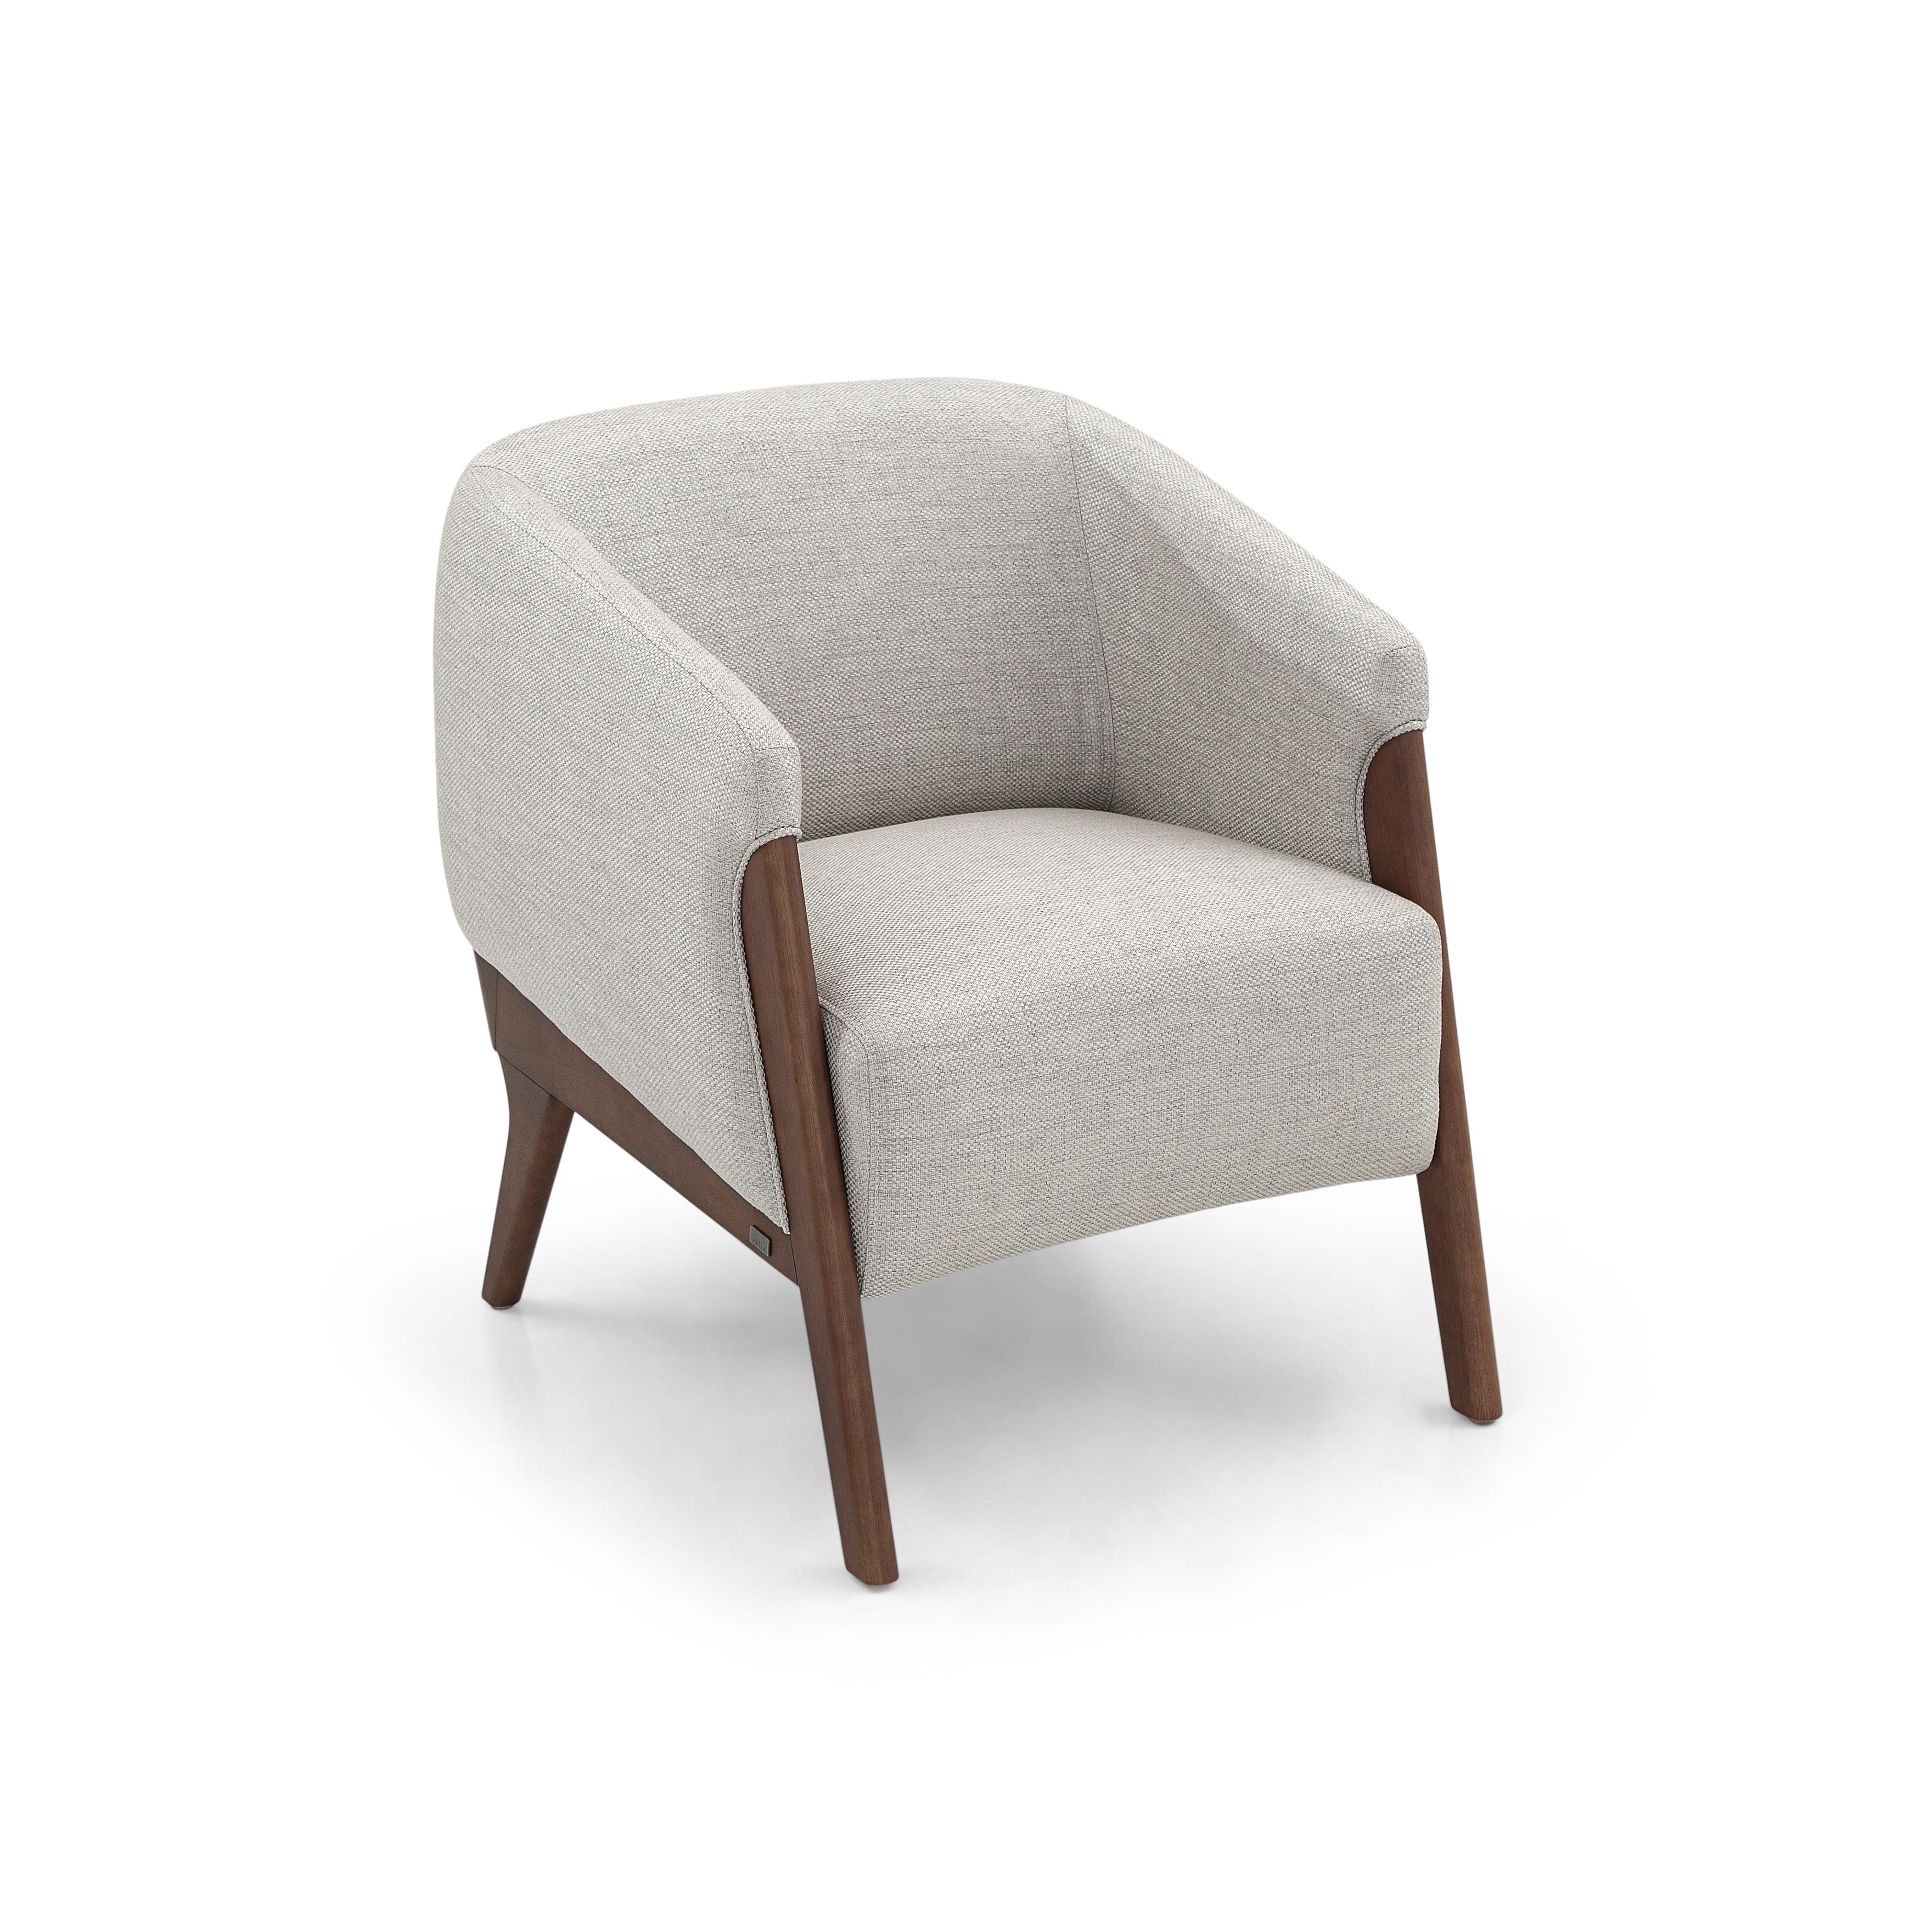 Brazilian Abra Armchair in Light Gray Fabric and Walnut Wood Finish For Sale